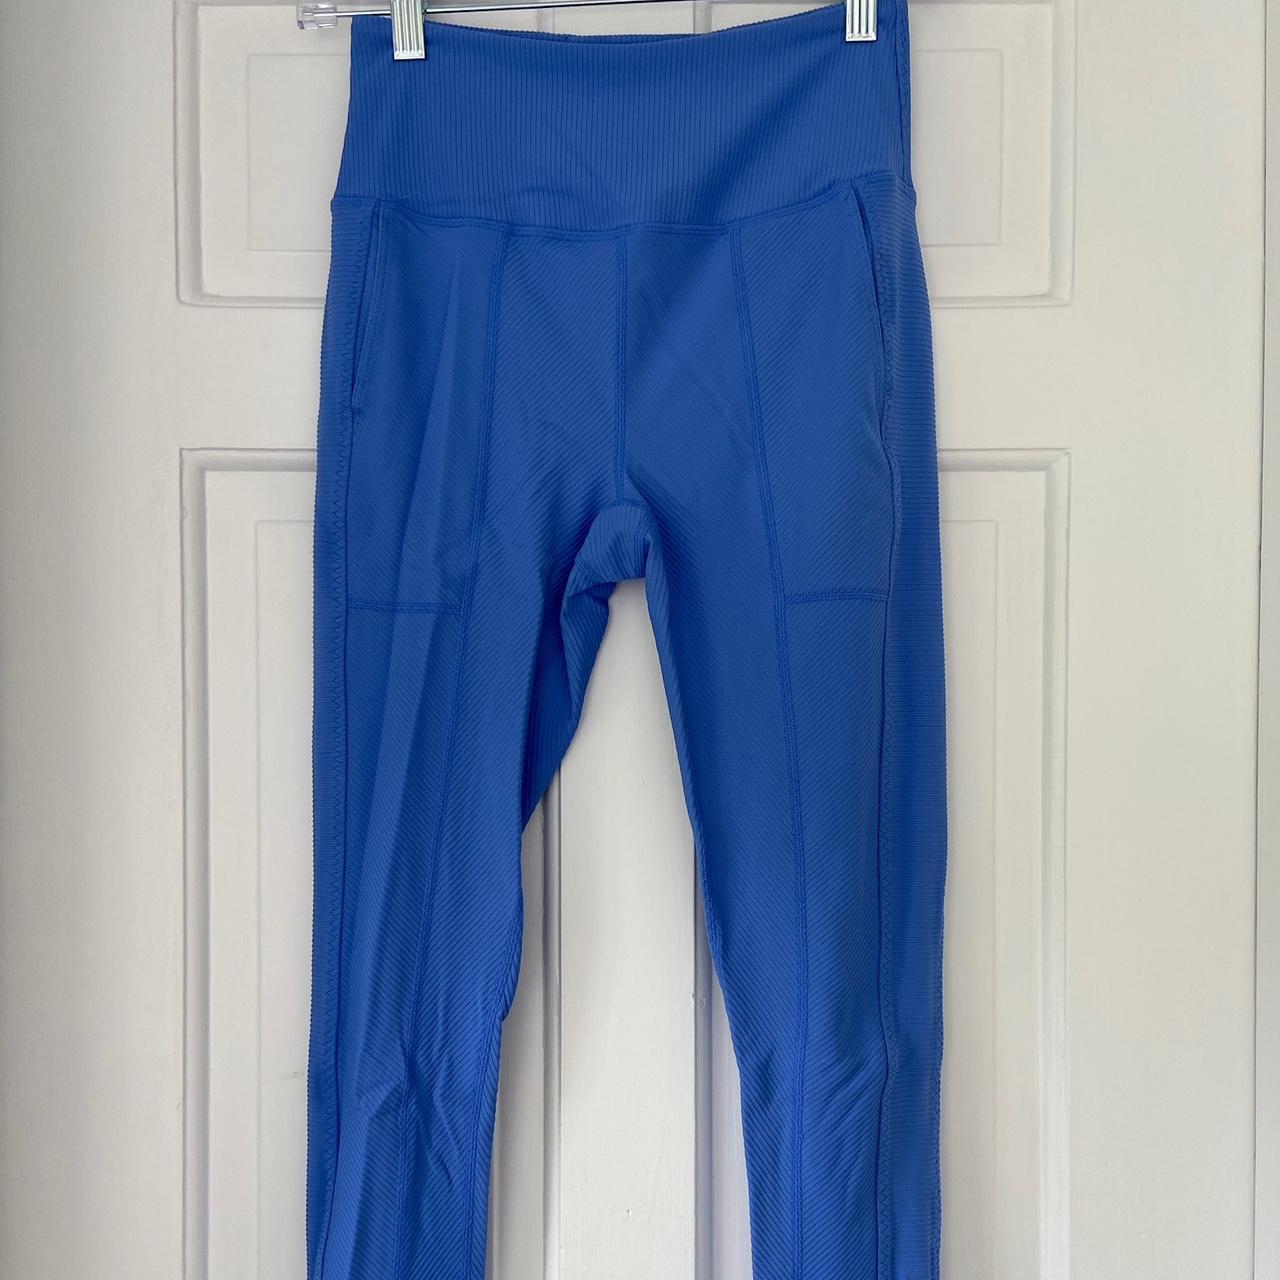 NWOT! Free People Movement X The Class Seamless - Depop